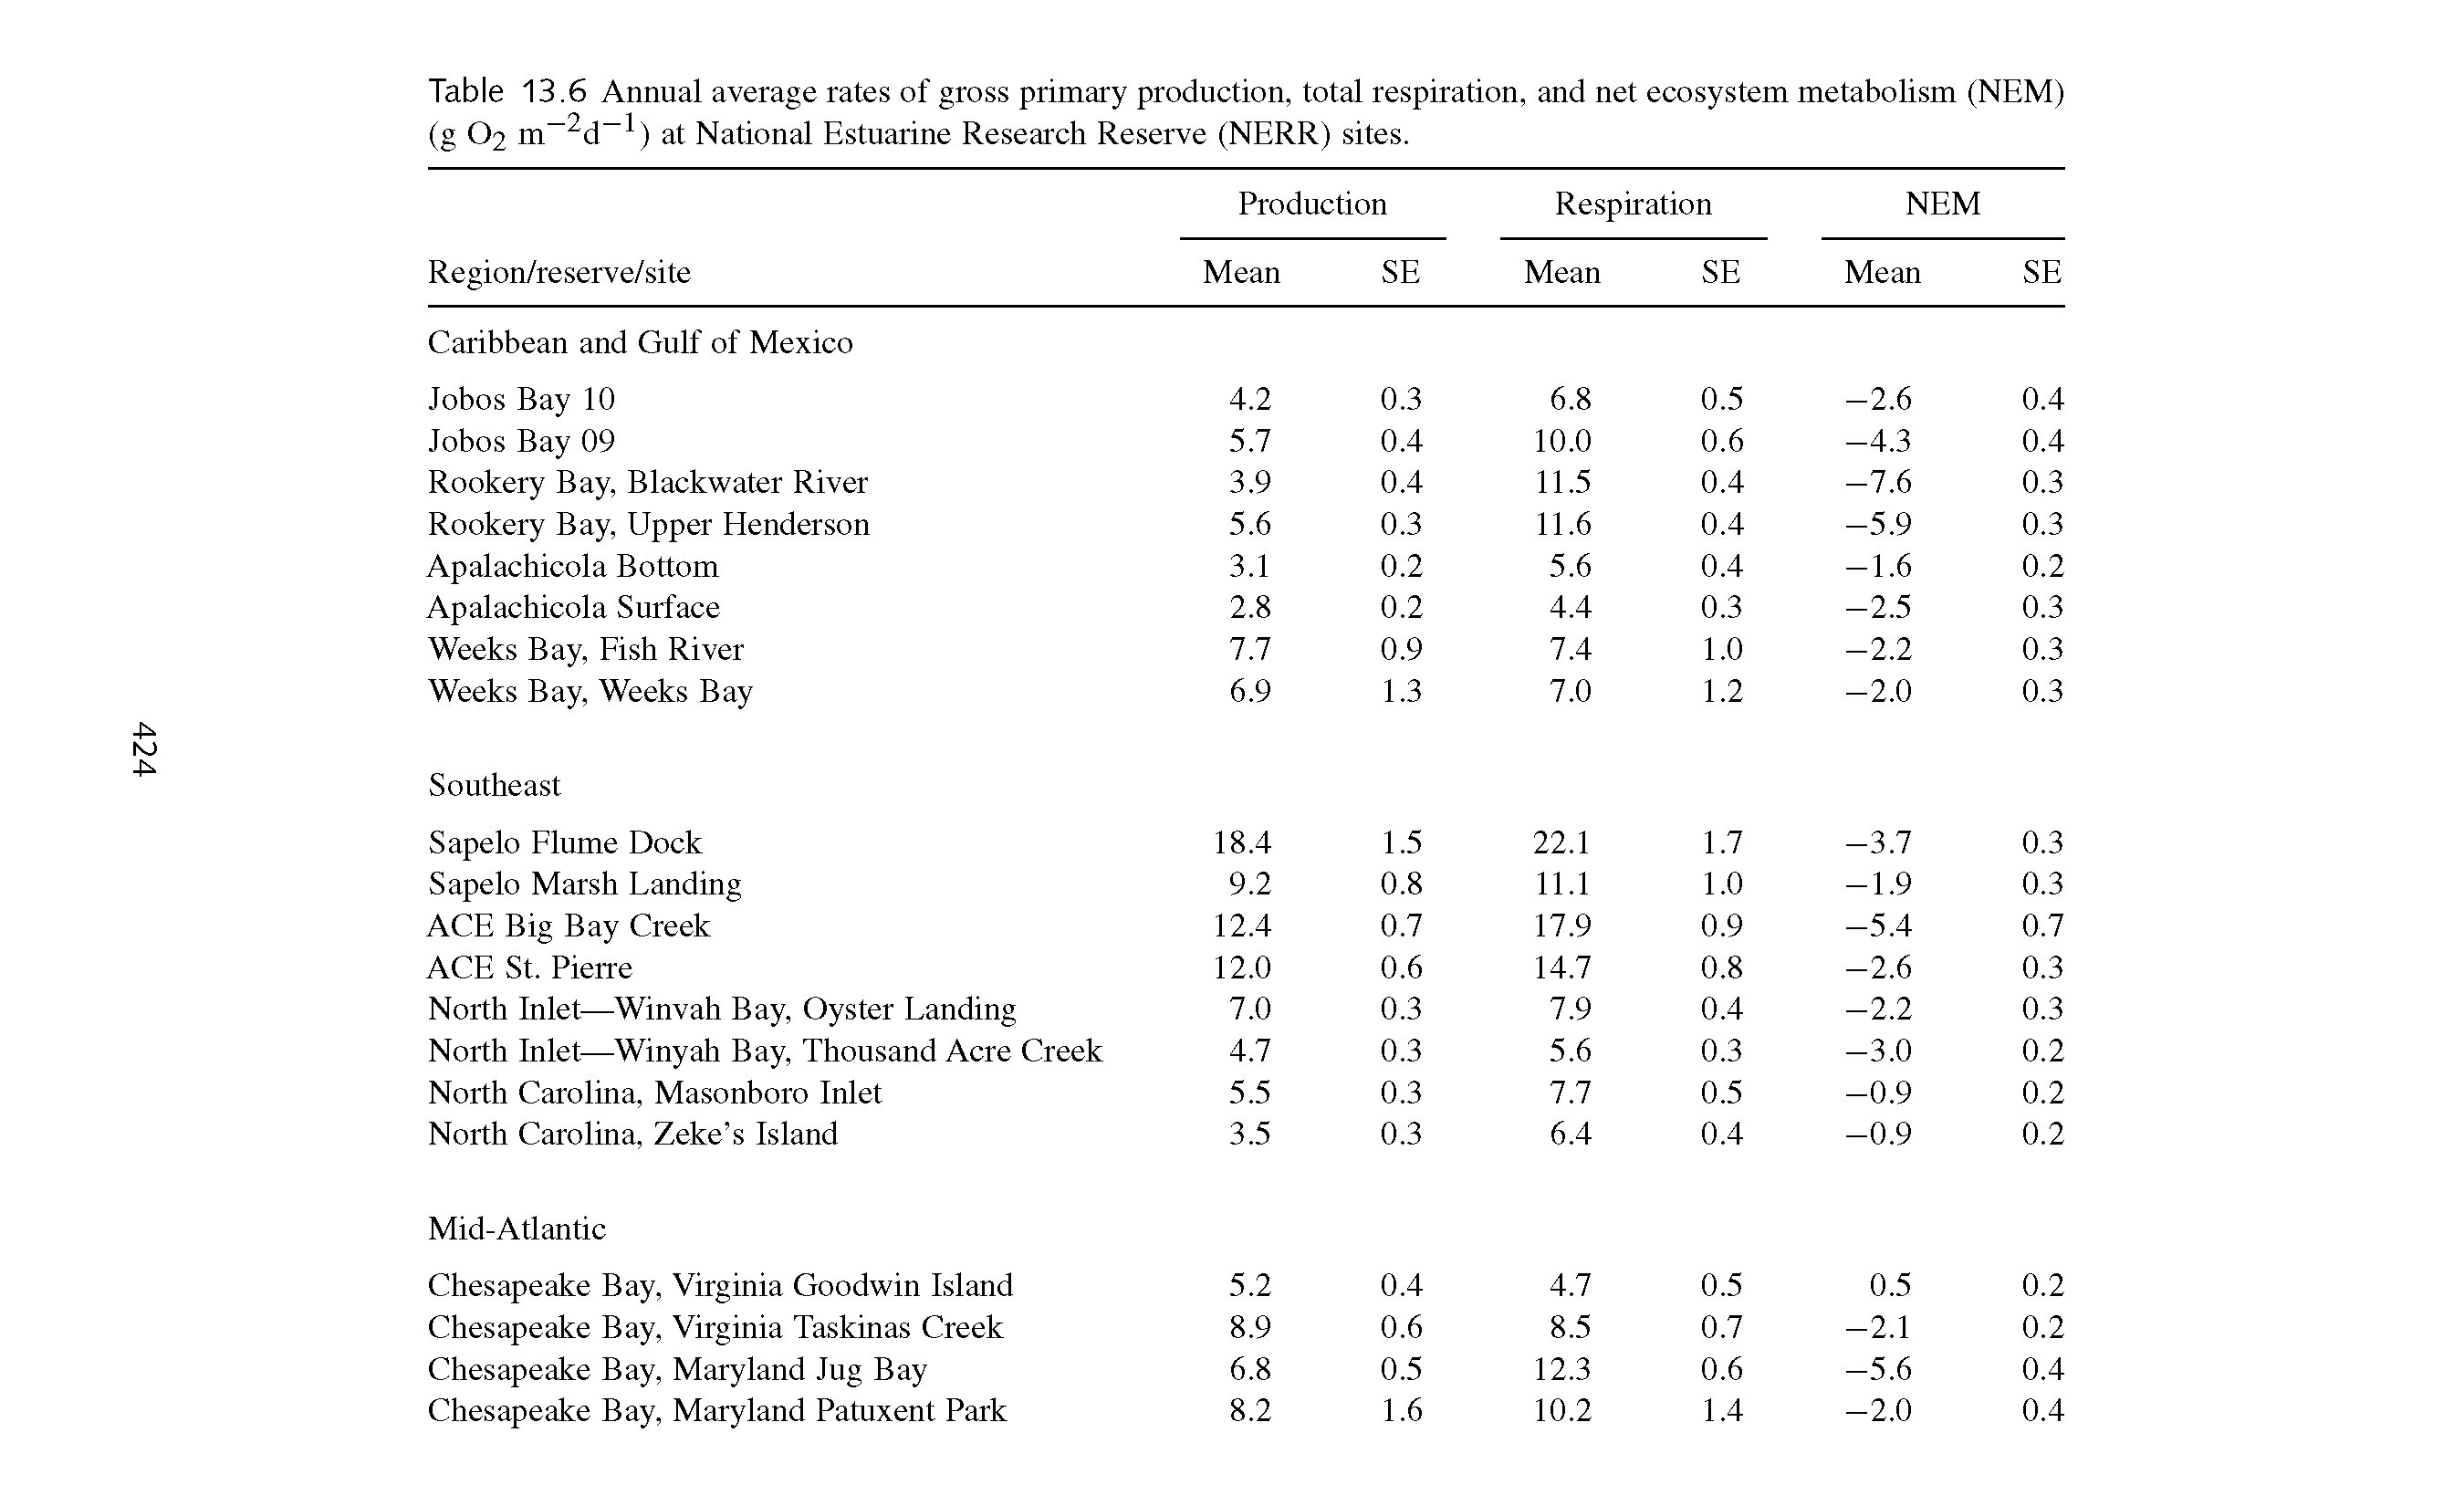 Table 13.6 Annual average rates of gross primary production, total respiration, and net ecosystem metabolism (NEM) (g O2 m-2d-1) at National Estuarine Research Reserve (NERR) sites.